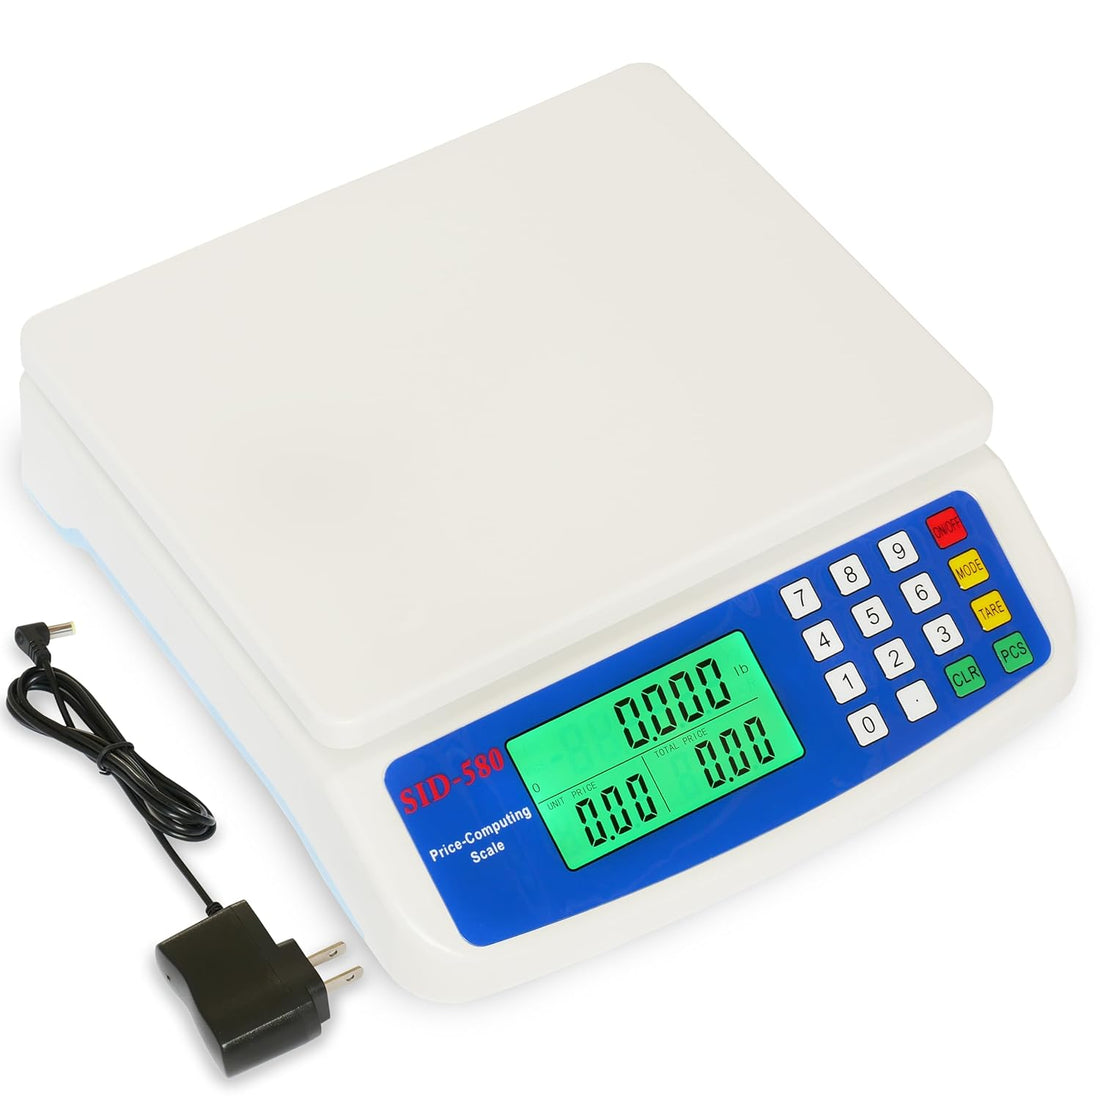 30kg x 1g Computer Electronic Scale, MOCCO LCD Commercial Food Product Scale 66LB Capacity with AC Adapter for Weighing Meats in Kitchen Stores Restaurant Market